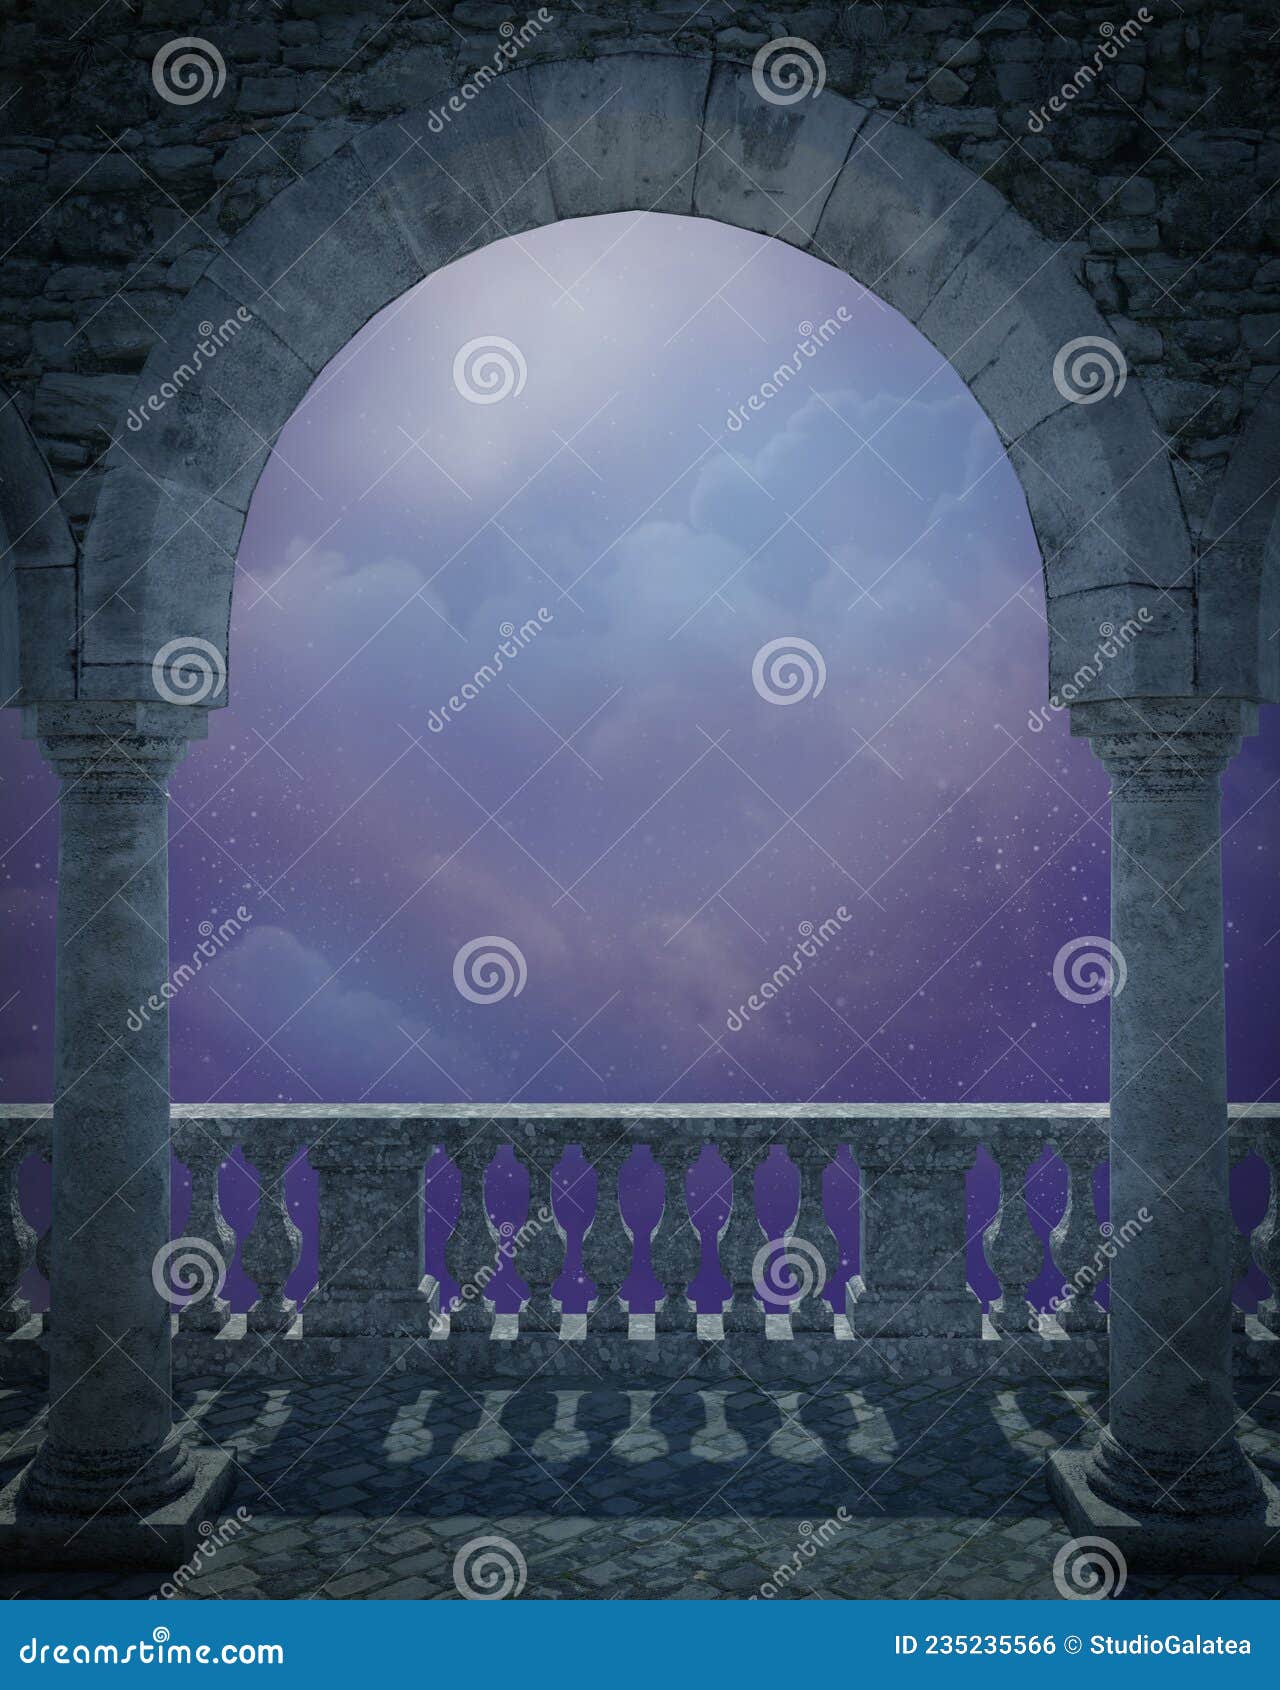 stone archway and balcony with fantasy moonlit sky